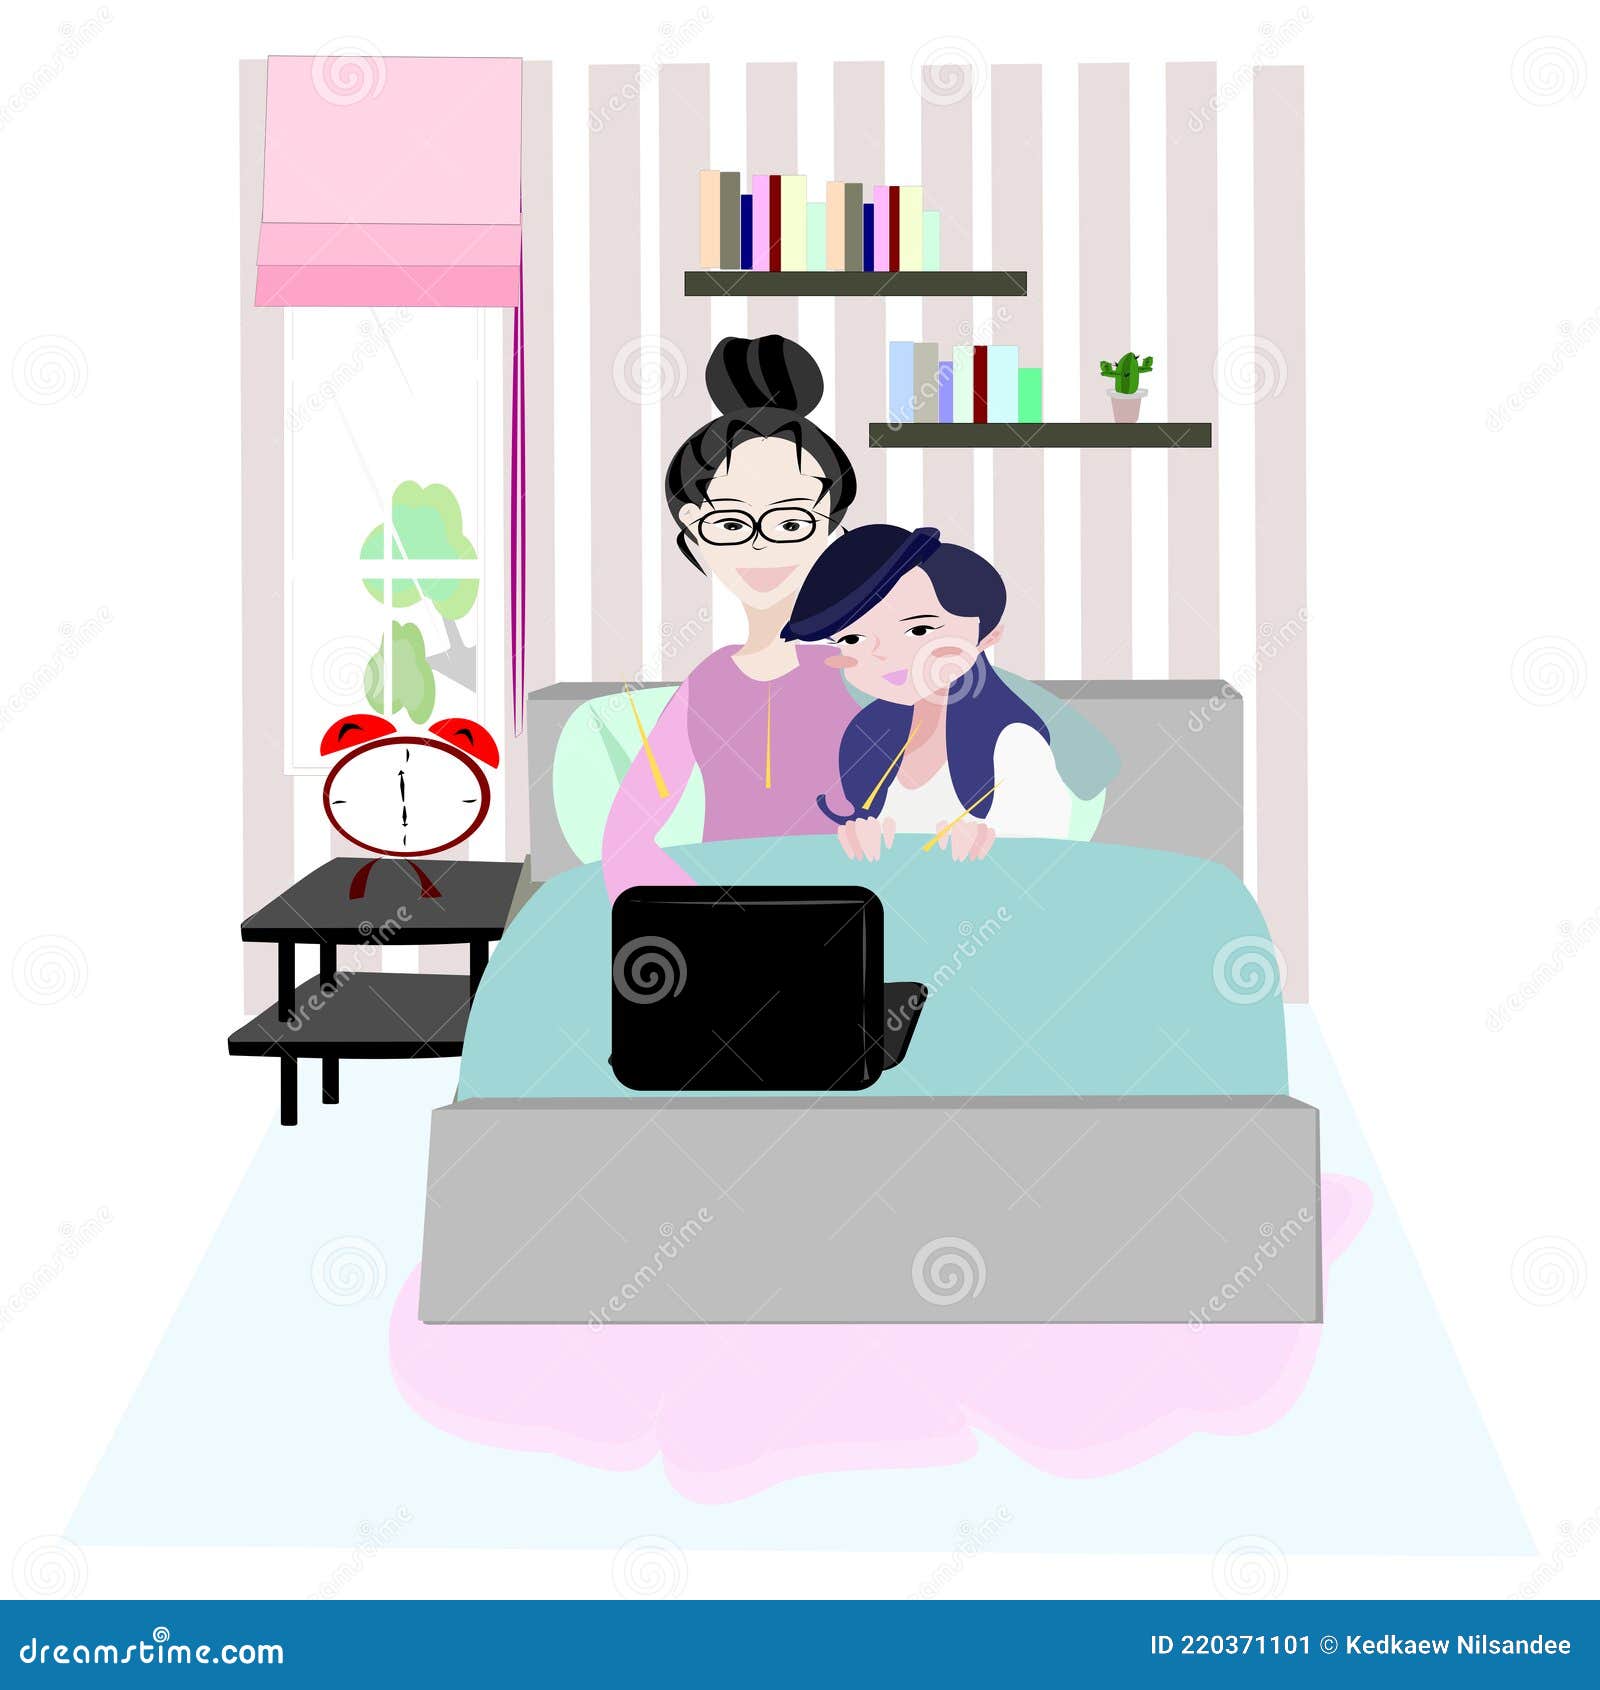 Illustration Lesbian Couple Lying on the Bed and Using a Laptop image